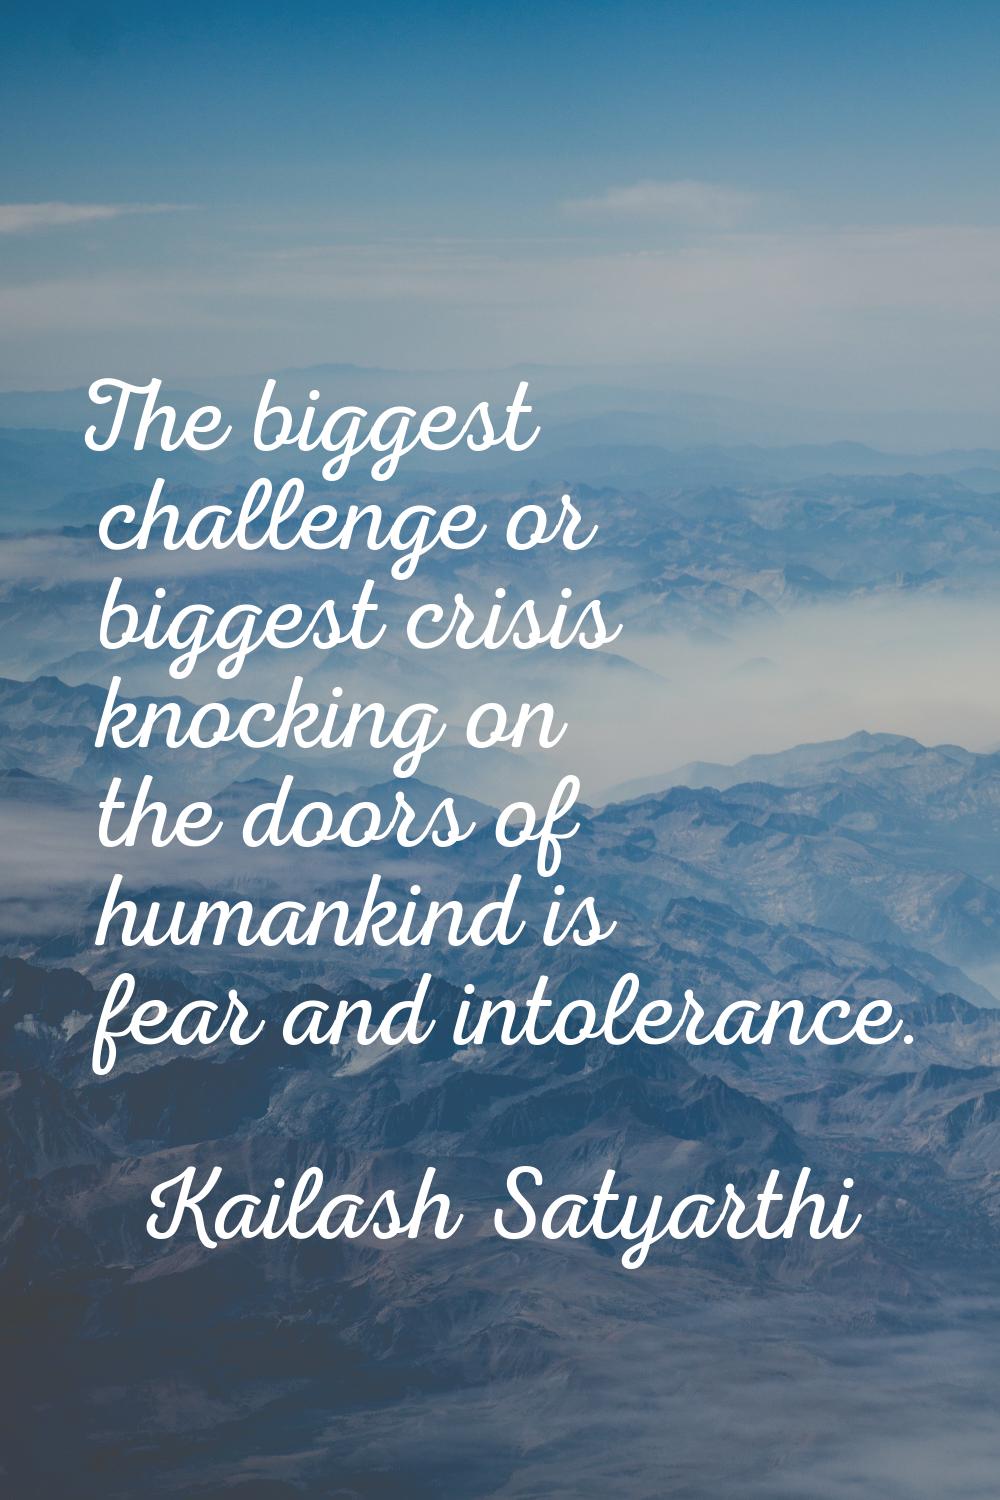 The biggest challenge or biggest crisis knocking on the doors of humankind is fear and intolerance.